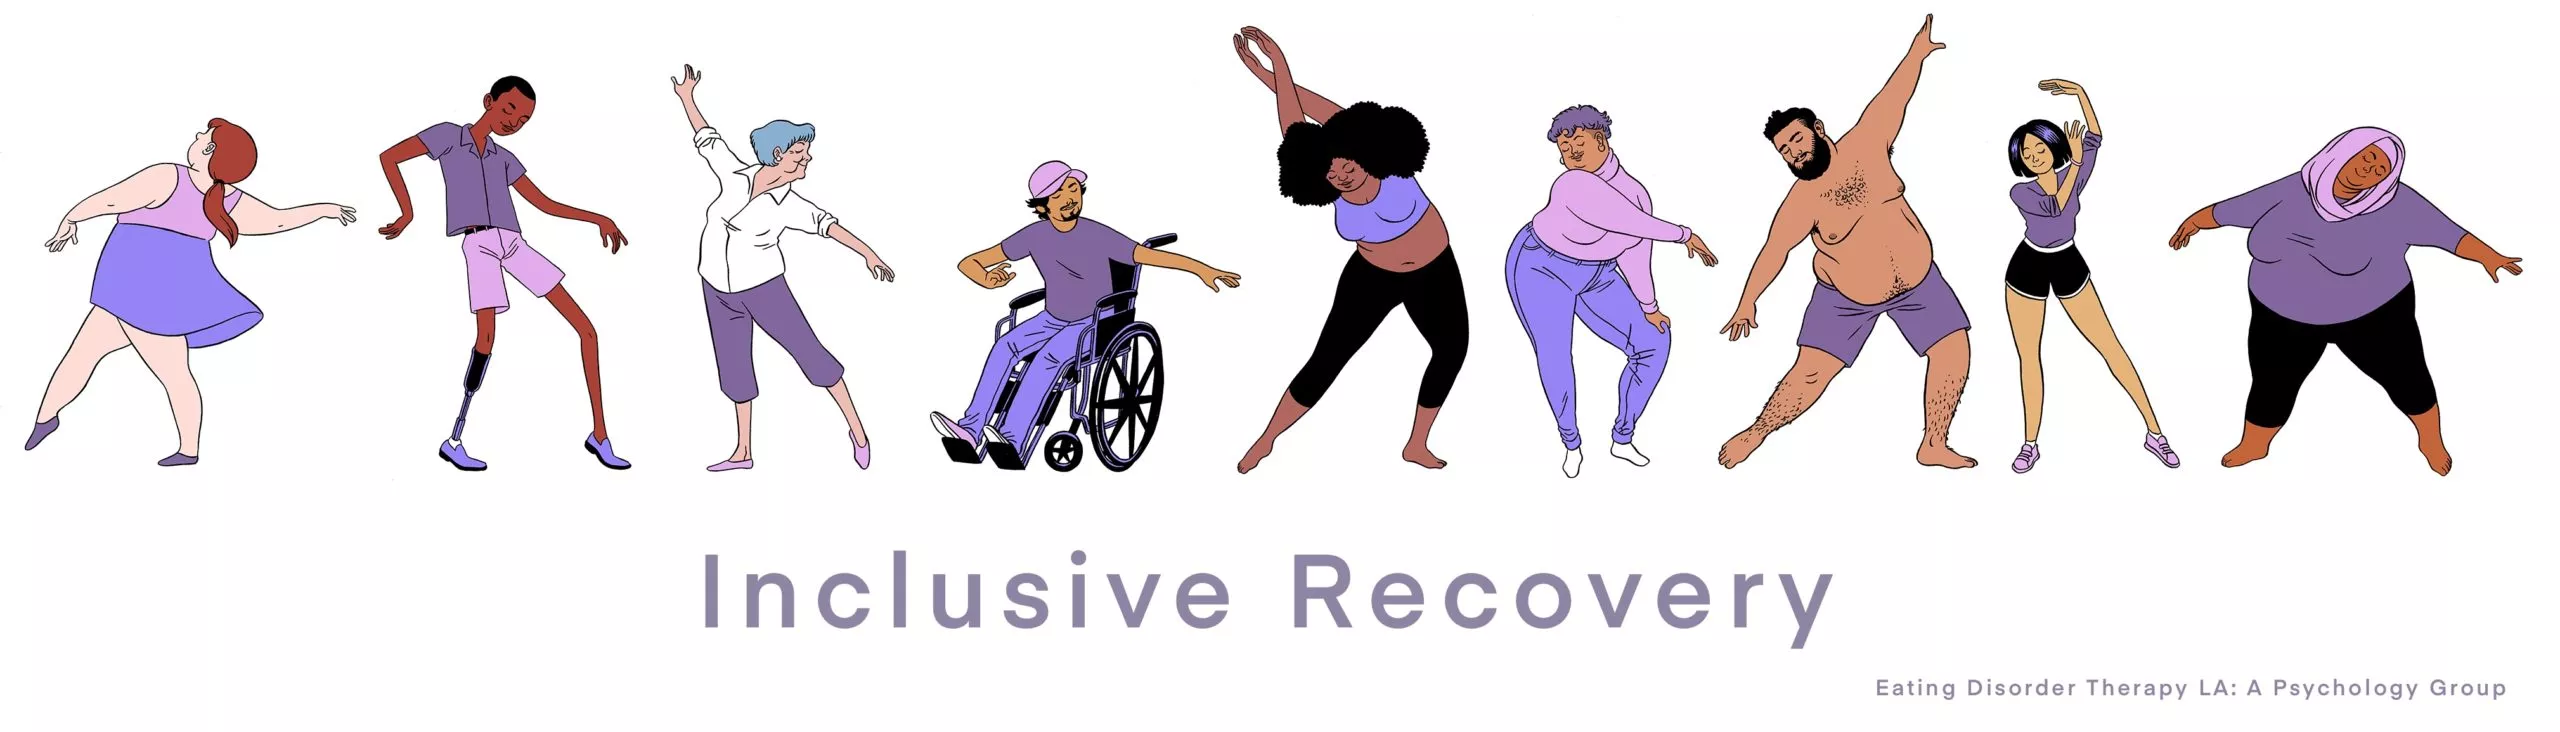 Illustrated image of multiple dancers of various body shapes, sizes and abilities with the text "Inclusive Recovery" underneath. Anorexia Nervosa Treatment in Los Angeles, CA and online anorexia nervosa treatment throughout the state of California including Modesto, Bakersfield, Napa, Palm Springs, and beyond! Learn more about anorexia treatment, including atypical anorexia as well, here.